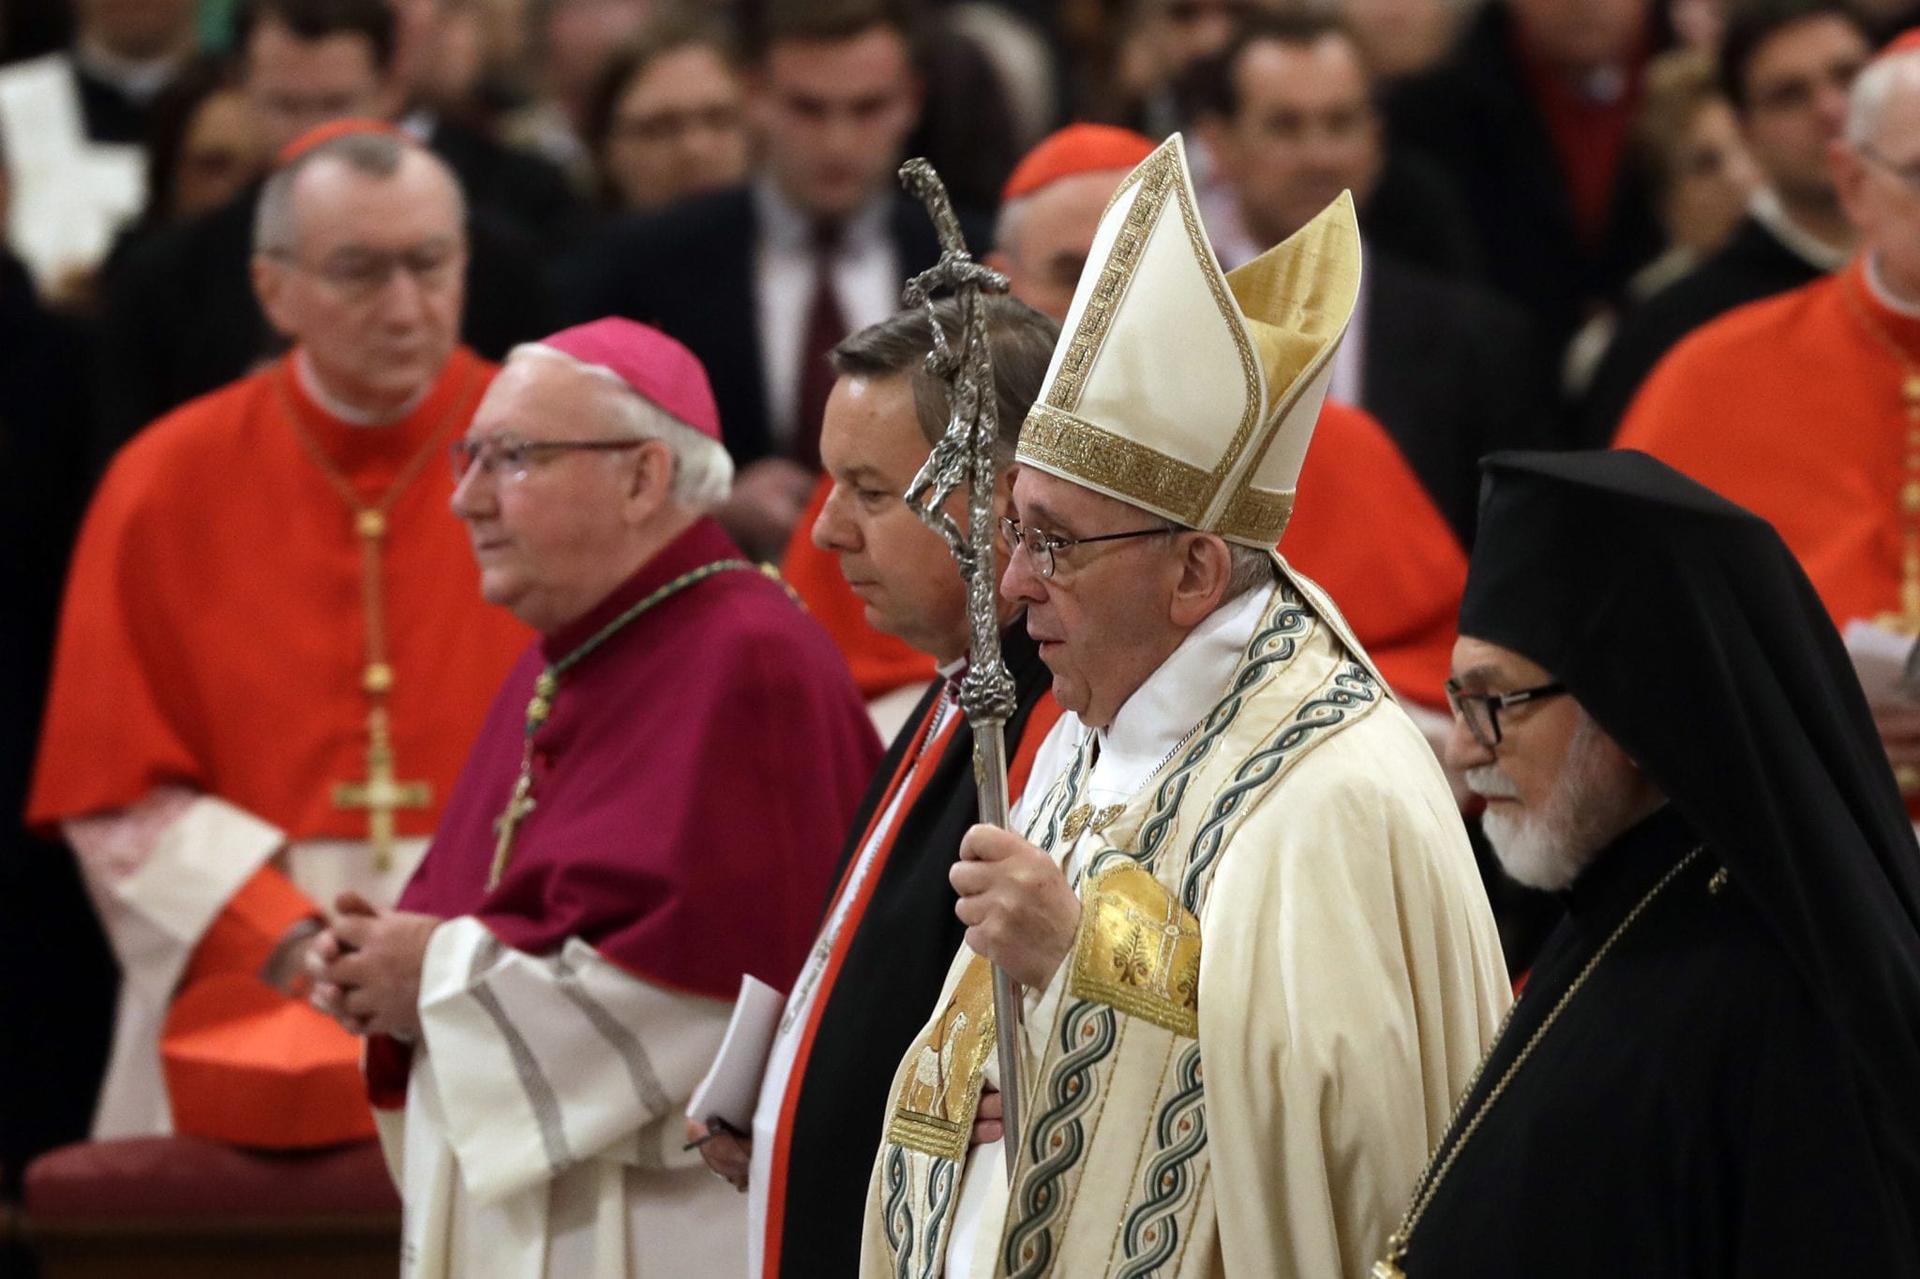 Christian Unity: Reconciliation requires sacrifice, pope says